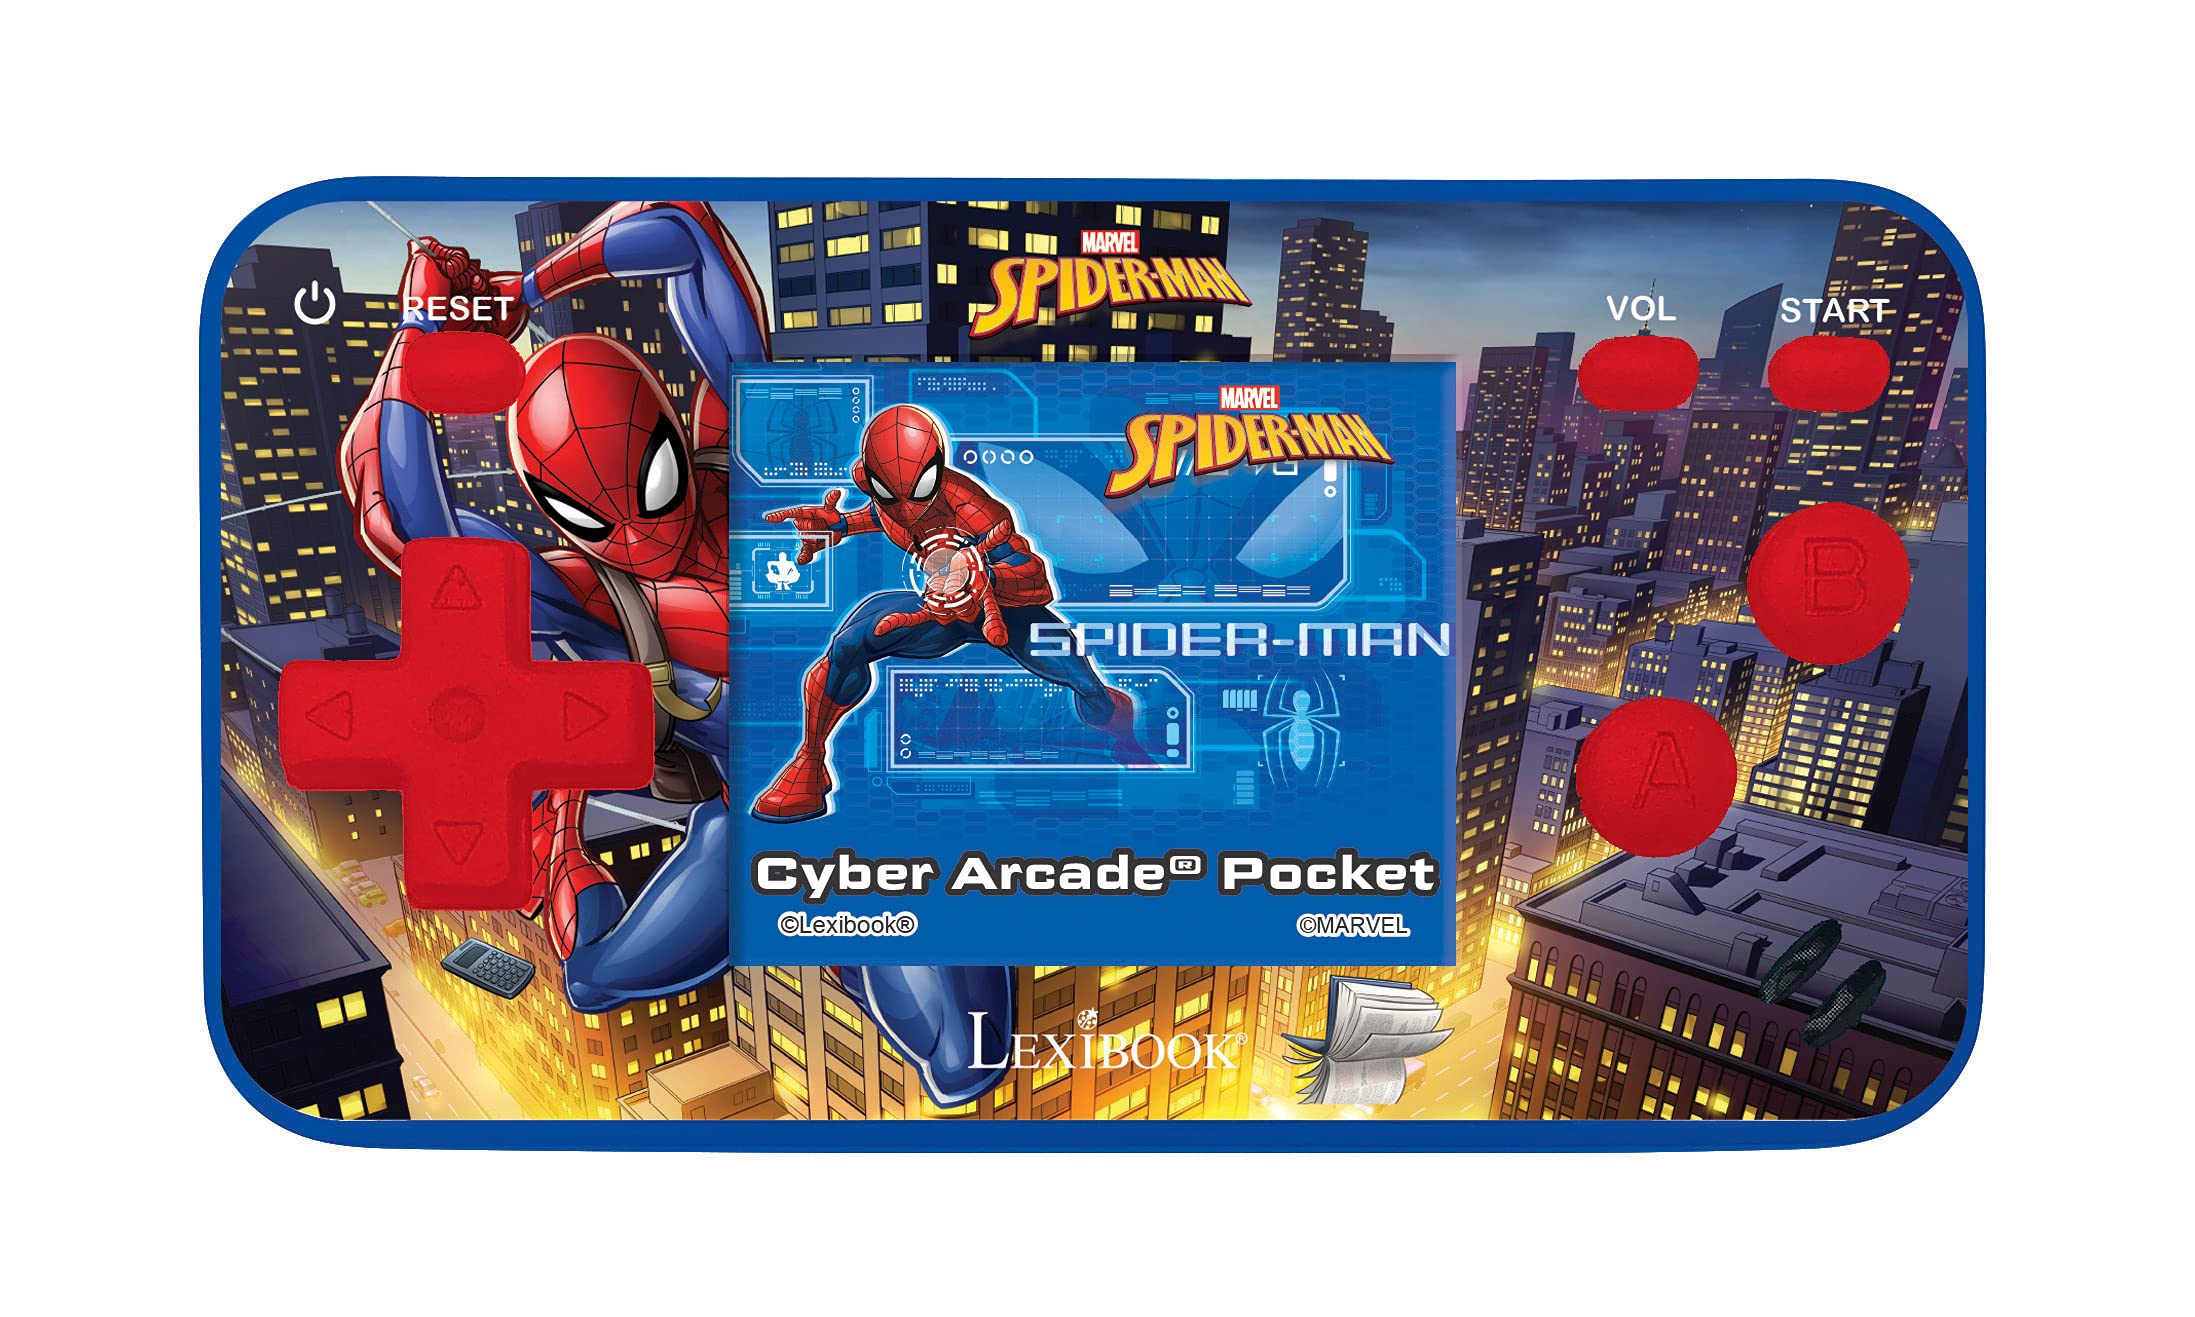 LEXiBOOK Spider-Man Cyber Arcade Pocket Game Console, 150 Games, LCD Screen, Battery Operated, red/Blue, JL1895SP